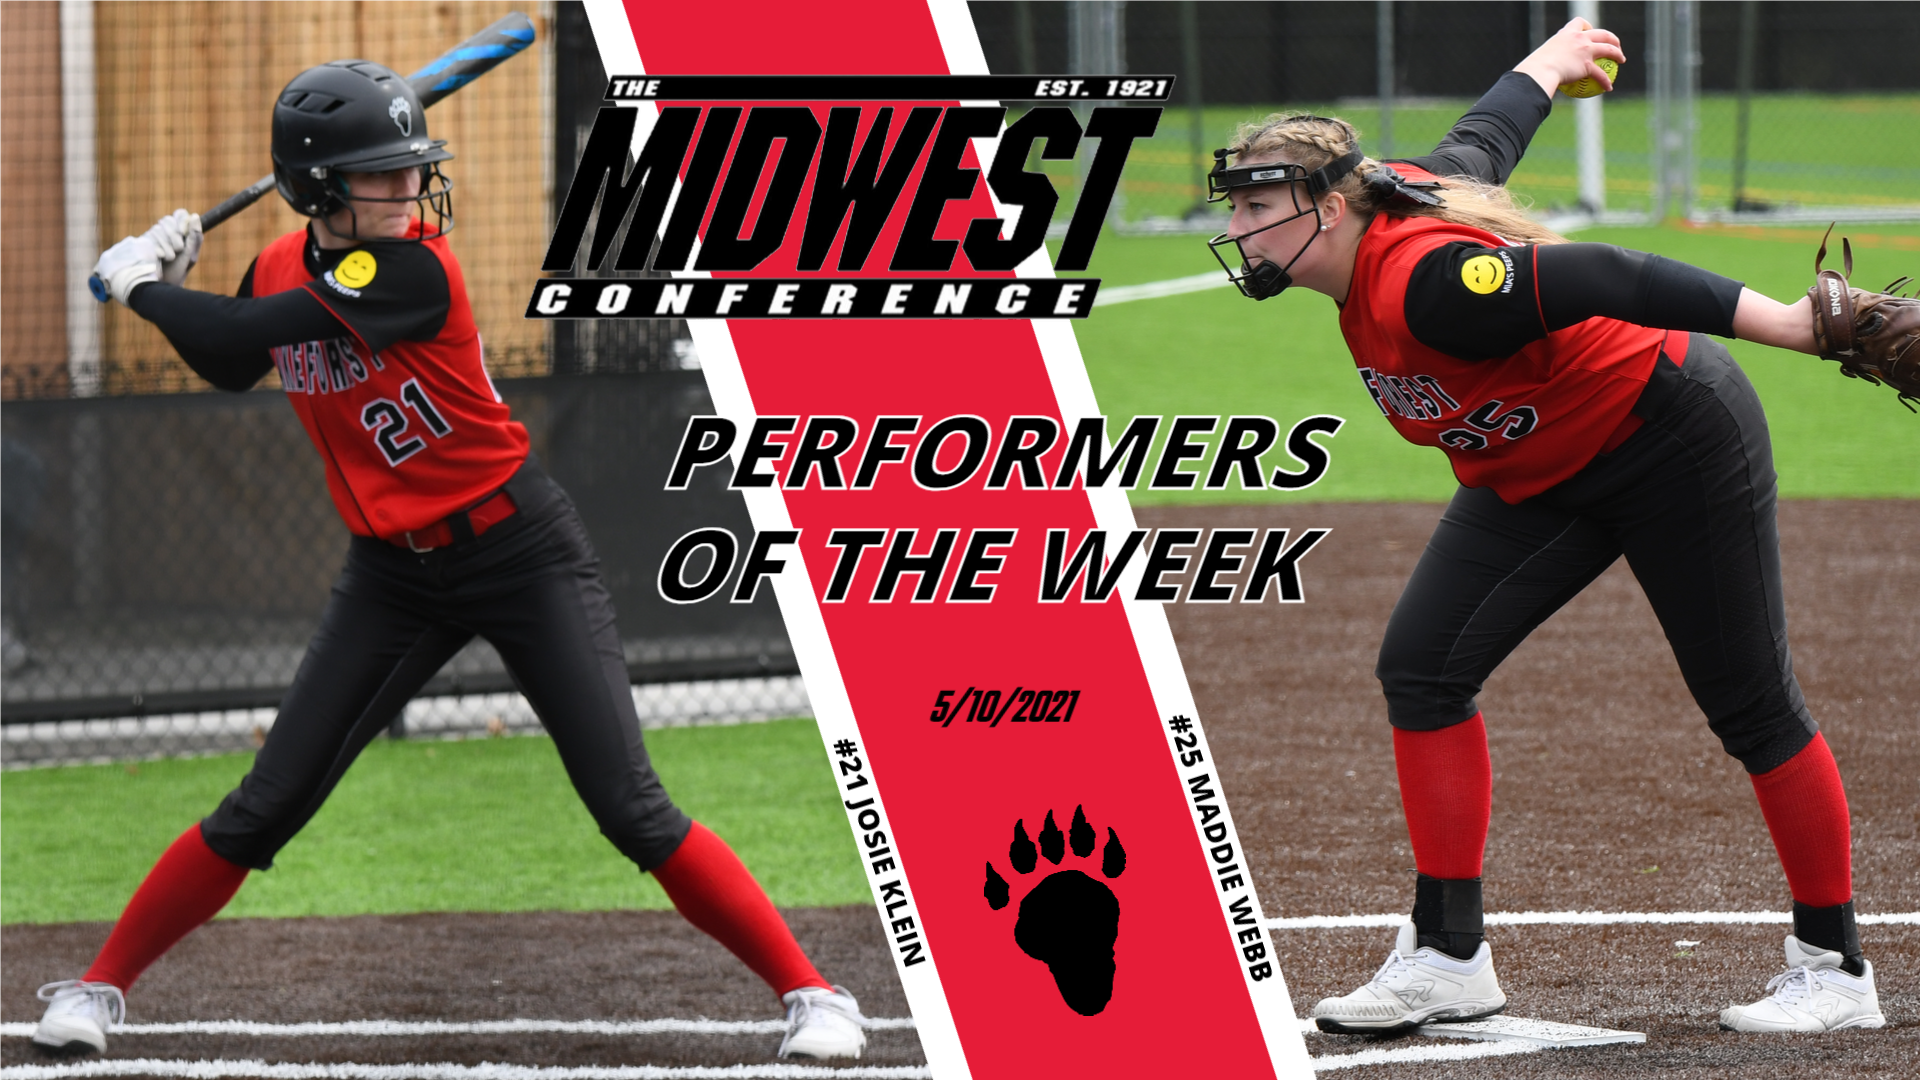 Foresters Sweep MWC Performer of the Week Awards